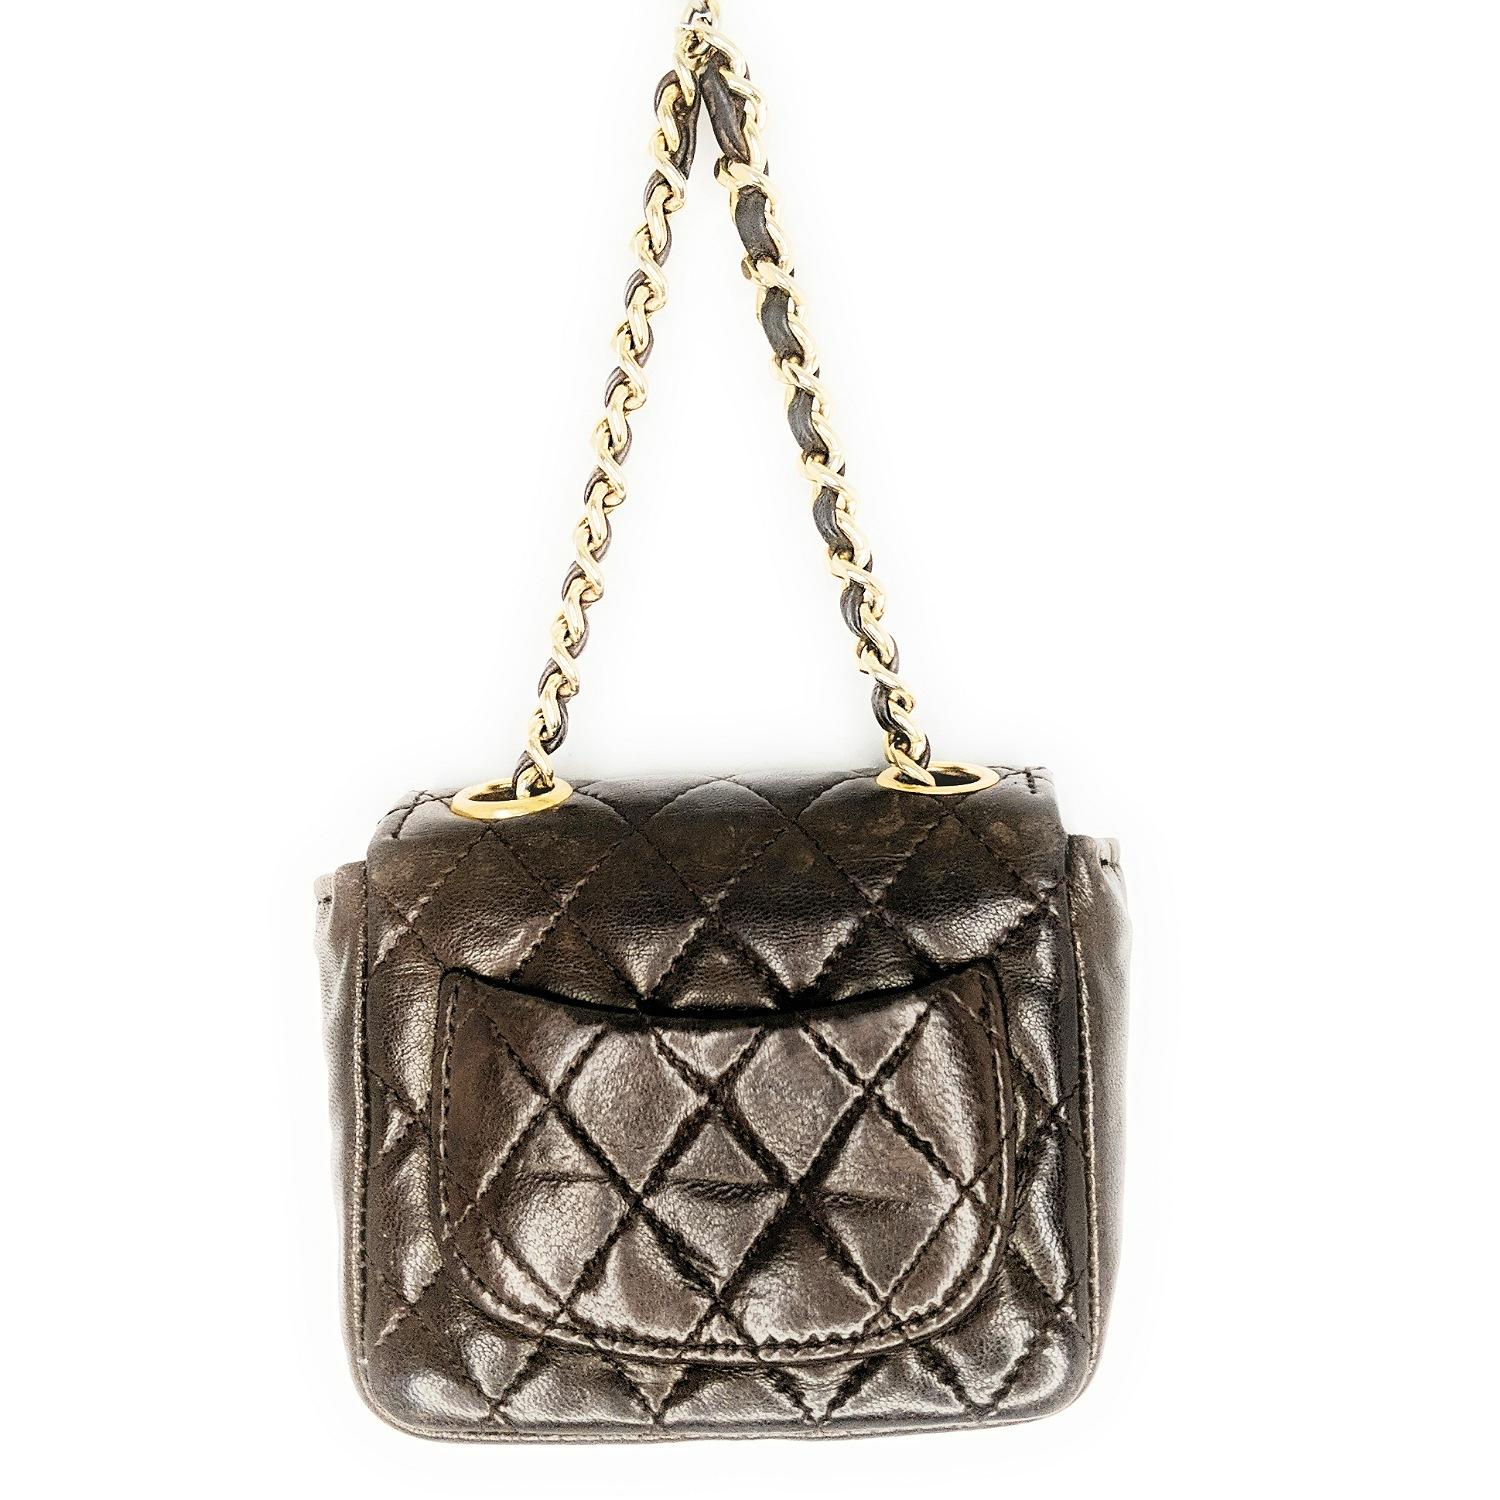 Brown quilted lambskin vintage Chanel micro belt bag with gold-tone hardware, single chain-link and leather waist strap featuring CC charm, single patch pocket at back, carmel lambskin interior and snap closure at front flap featuring CC logo